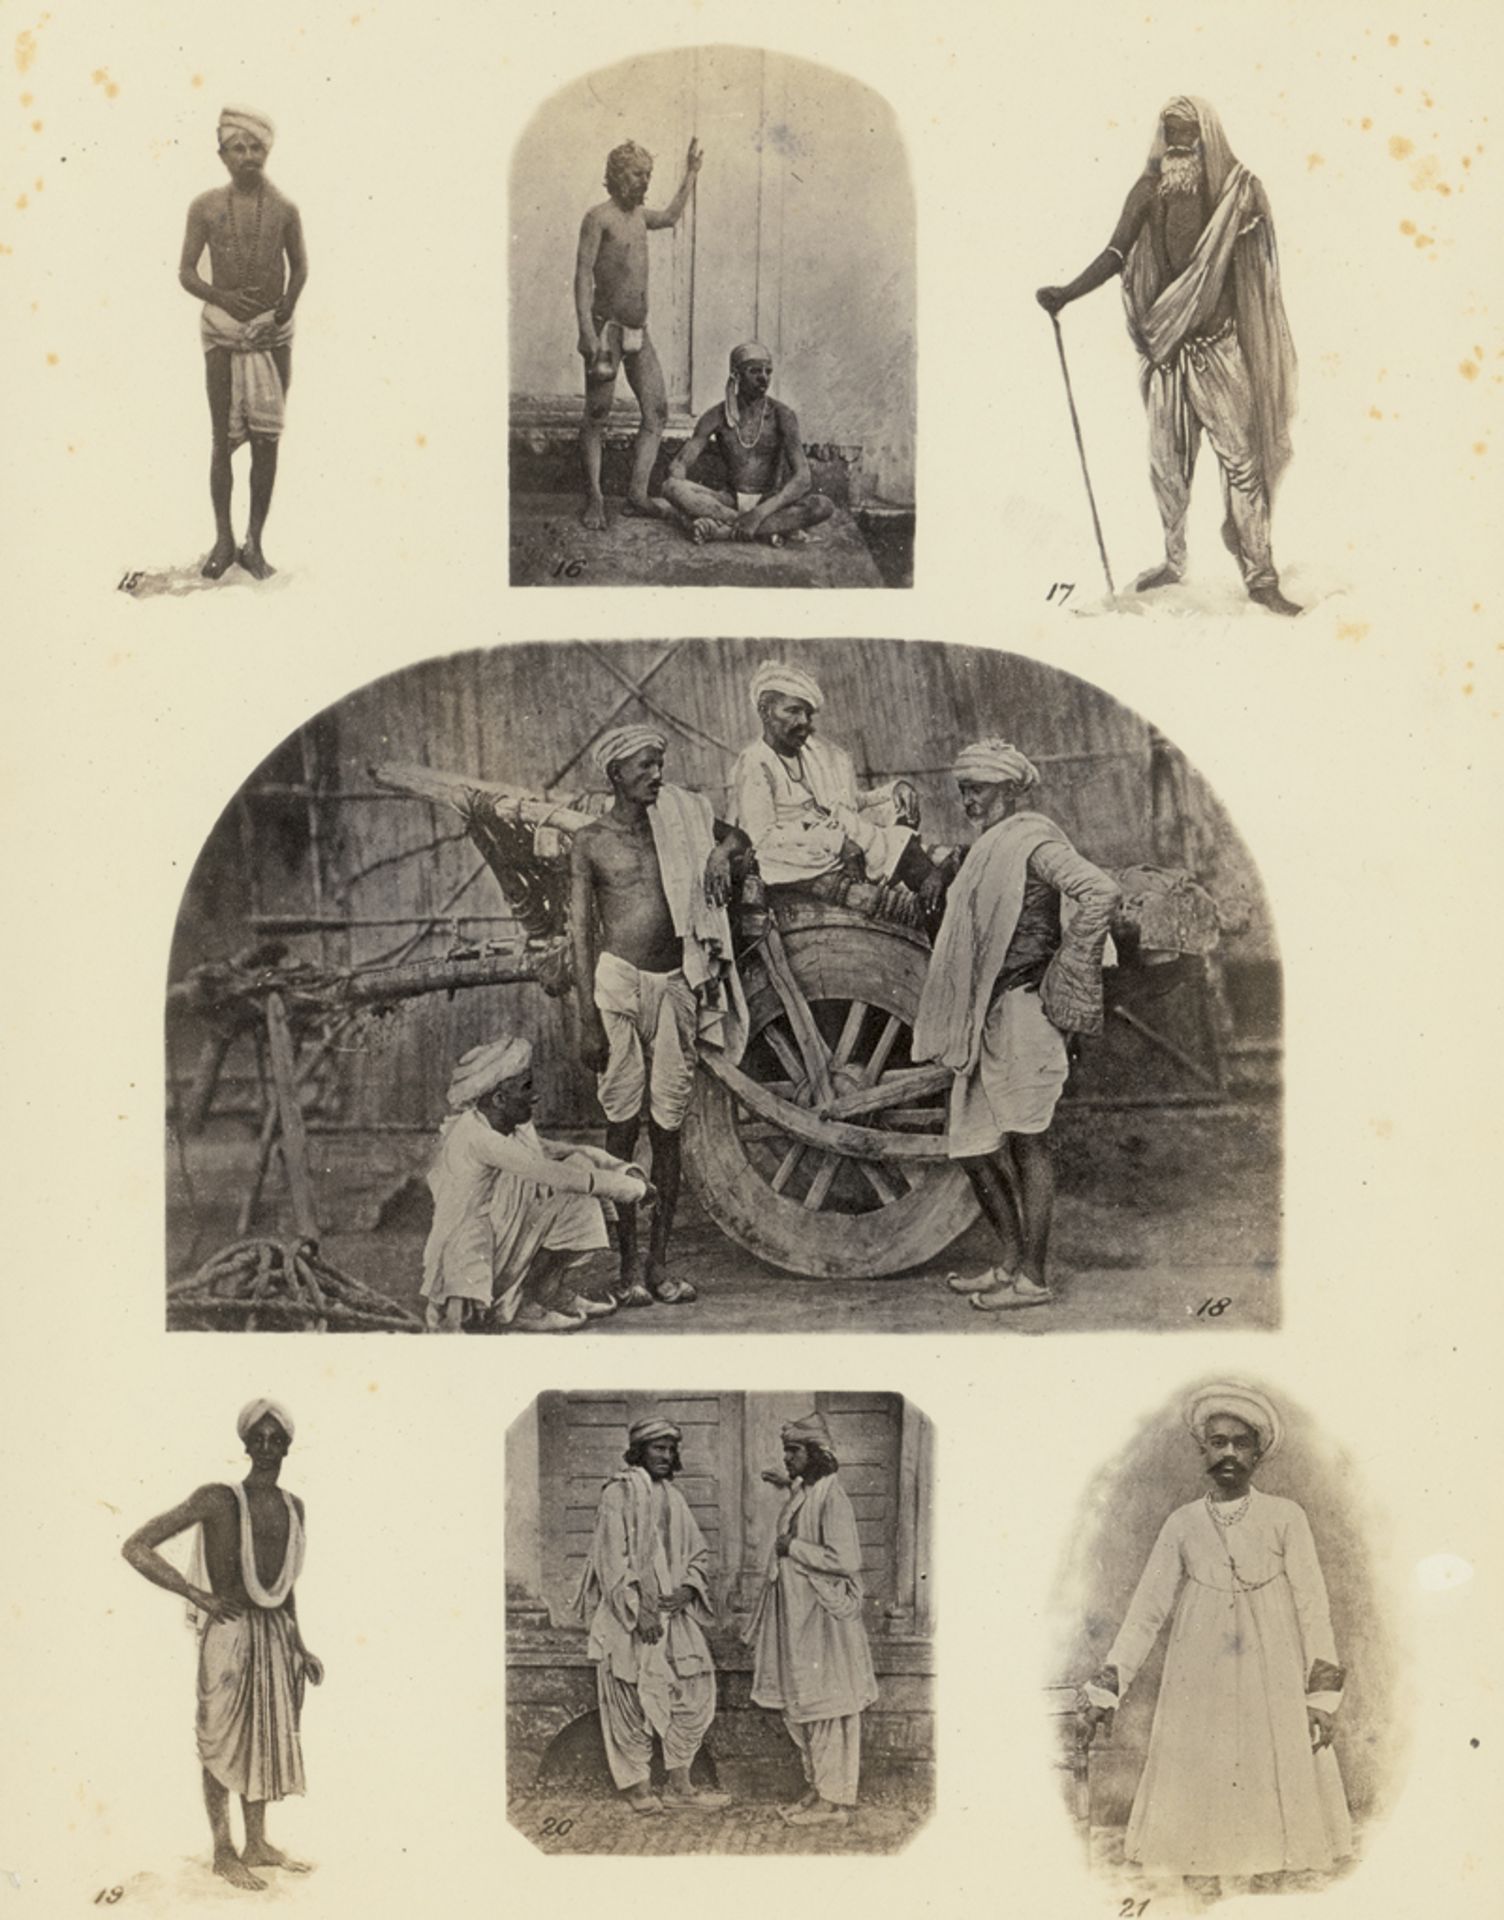 Watson, John Forbes: The Textile Manufactures and the Costumes of the People of India